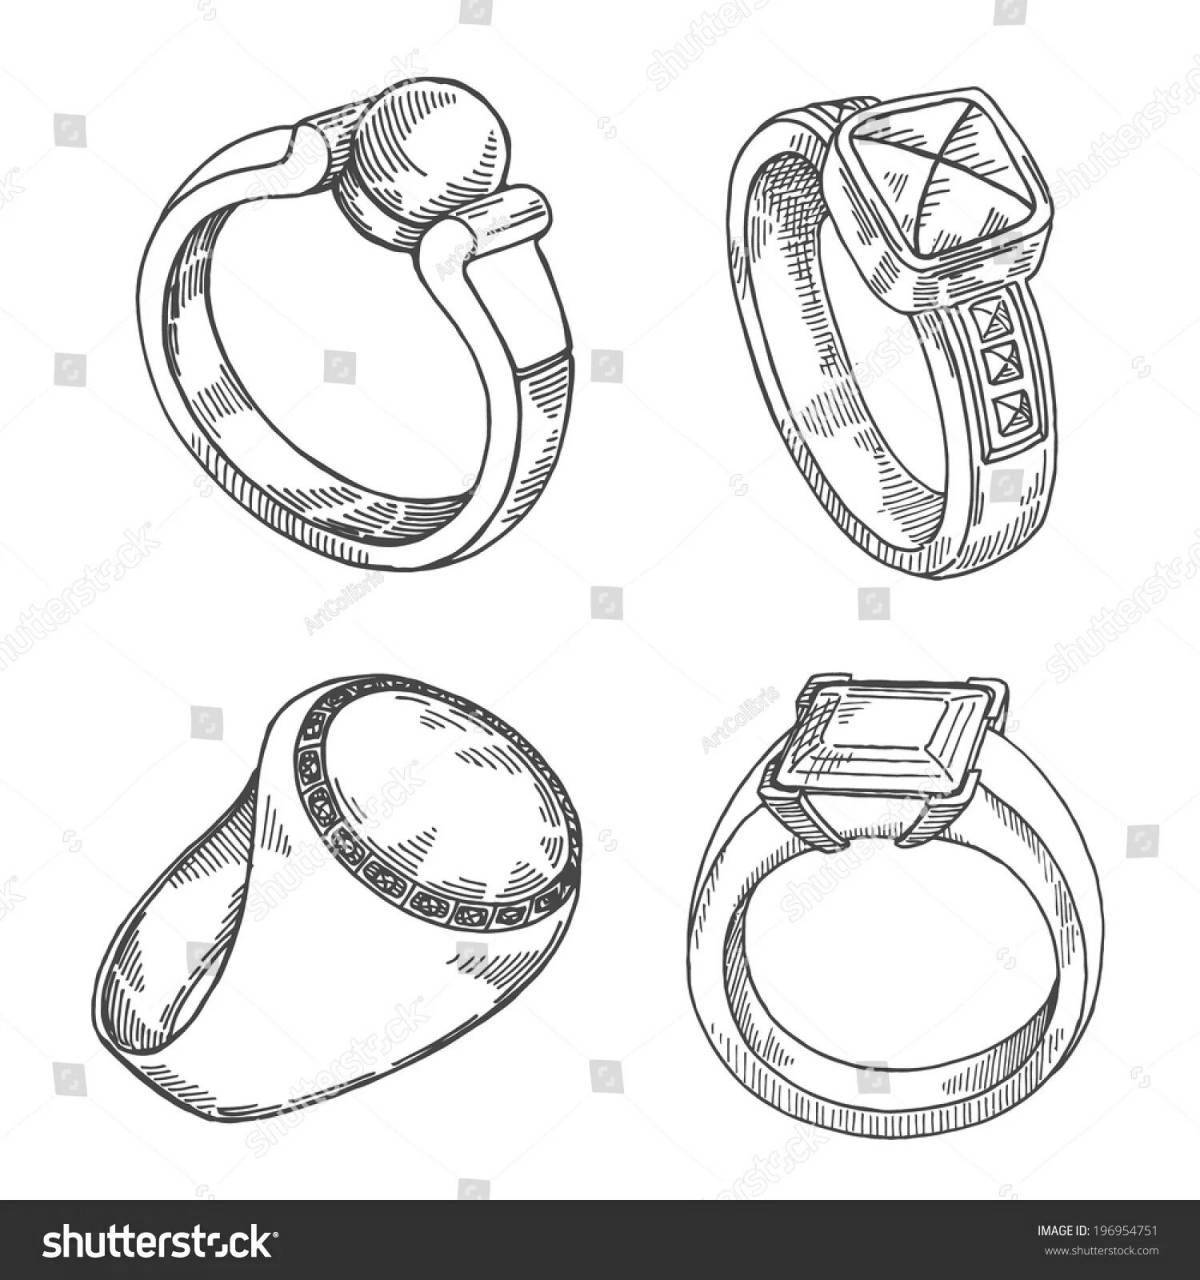 Dazzling wedding ring coloring pages